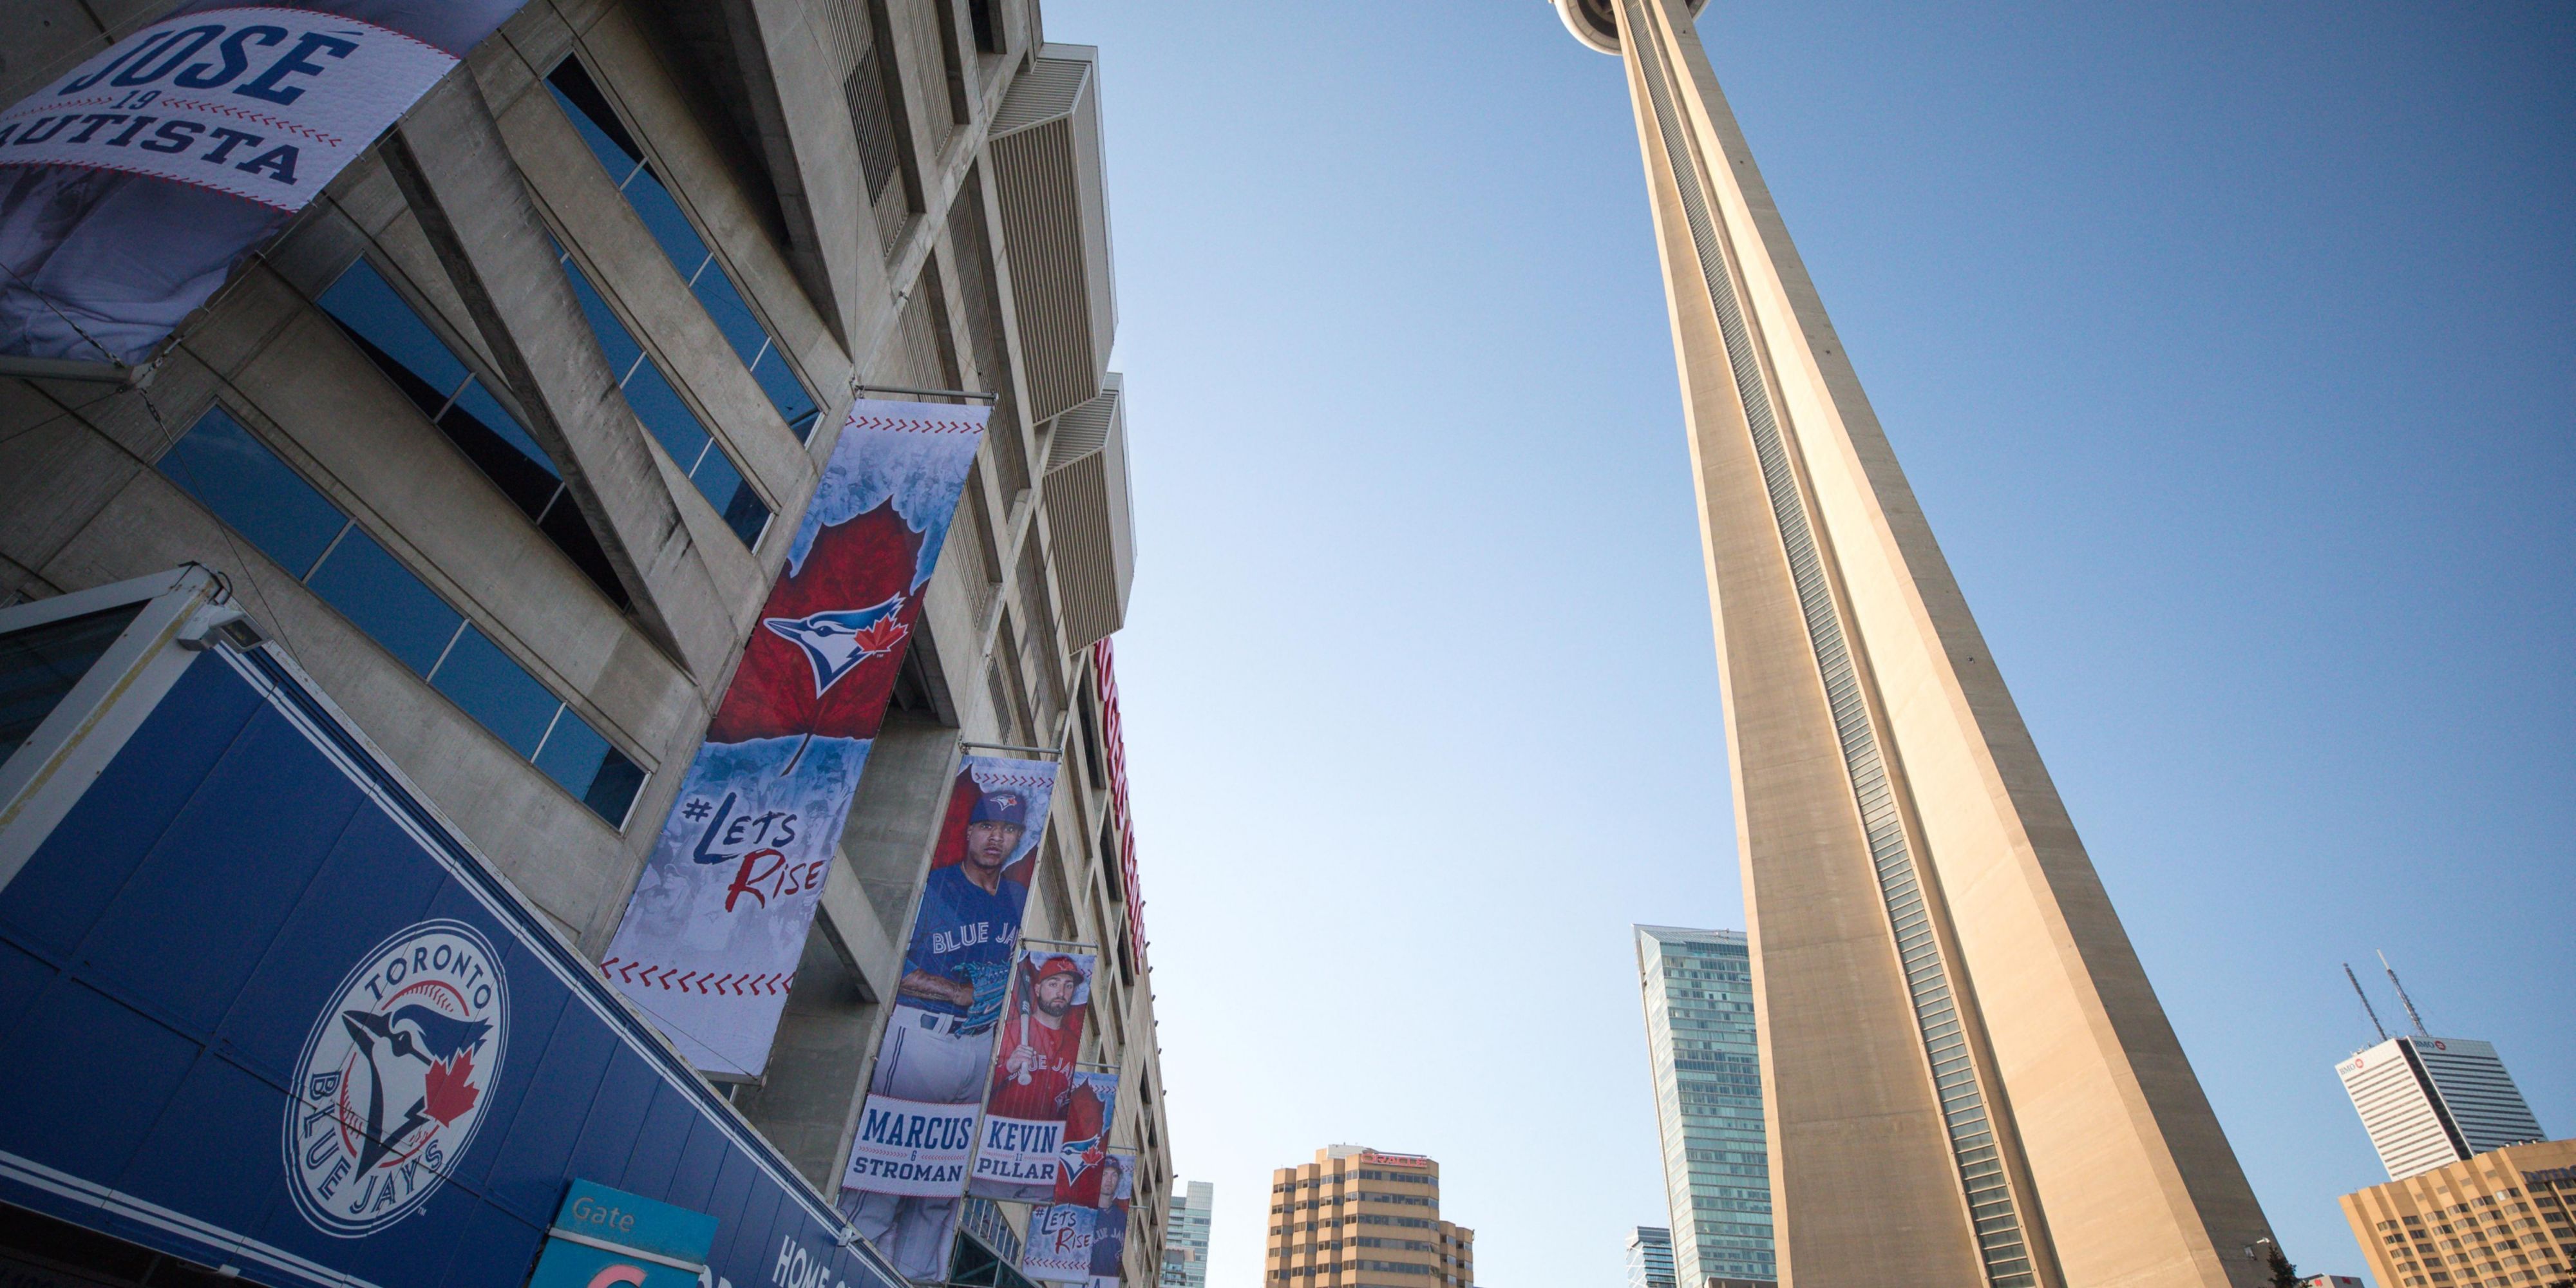 If you're a baseball fan looking for a hotel that's close to the action, look no further than our hotel located just a short walk away from Rogers Center in Toronto. Our convenient location puts you right in the heart of the action, so you can easily catch a game or explore the vibrant city around you. 